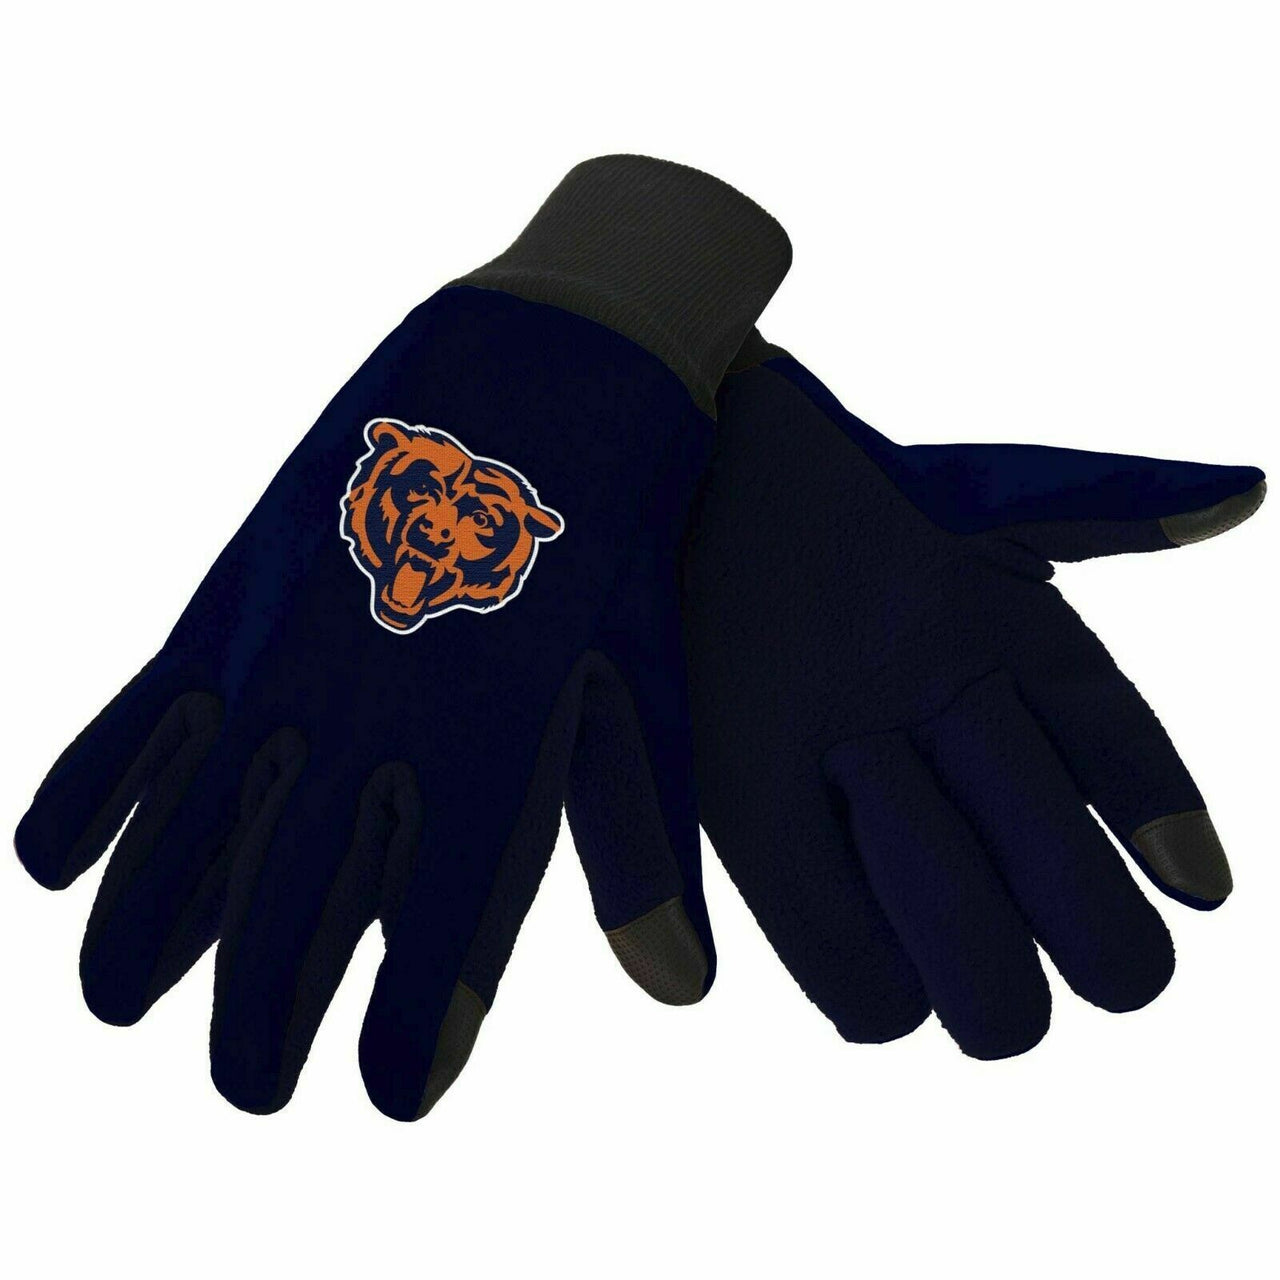 Chicago Bears Texting Gloves - Dynasty Sports & Framing 